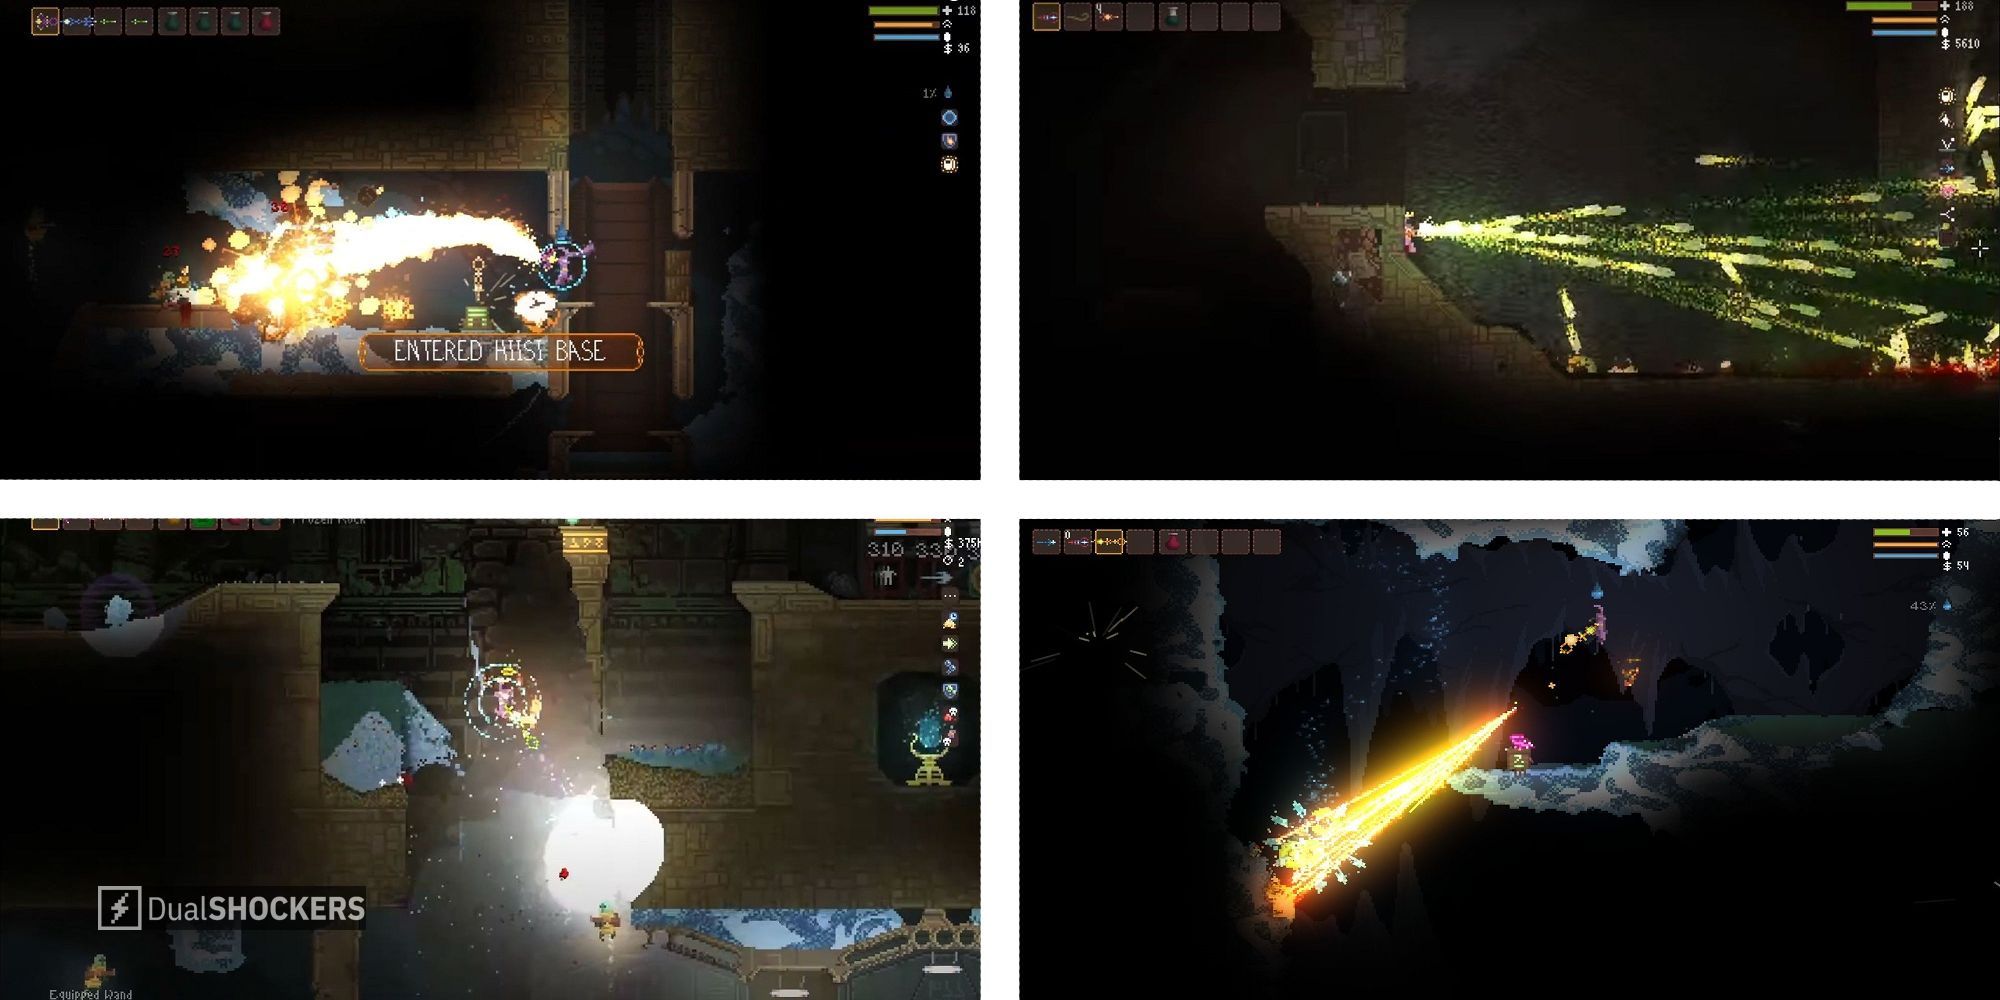 Various spells from noita causing explosive effects.